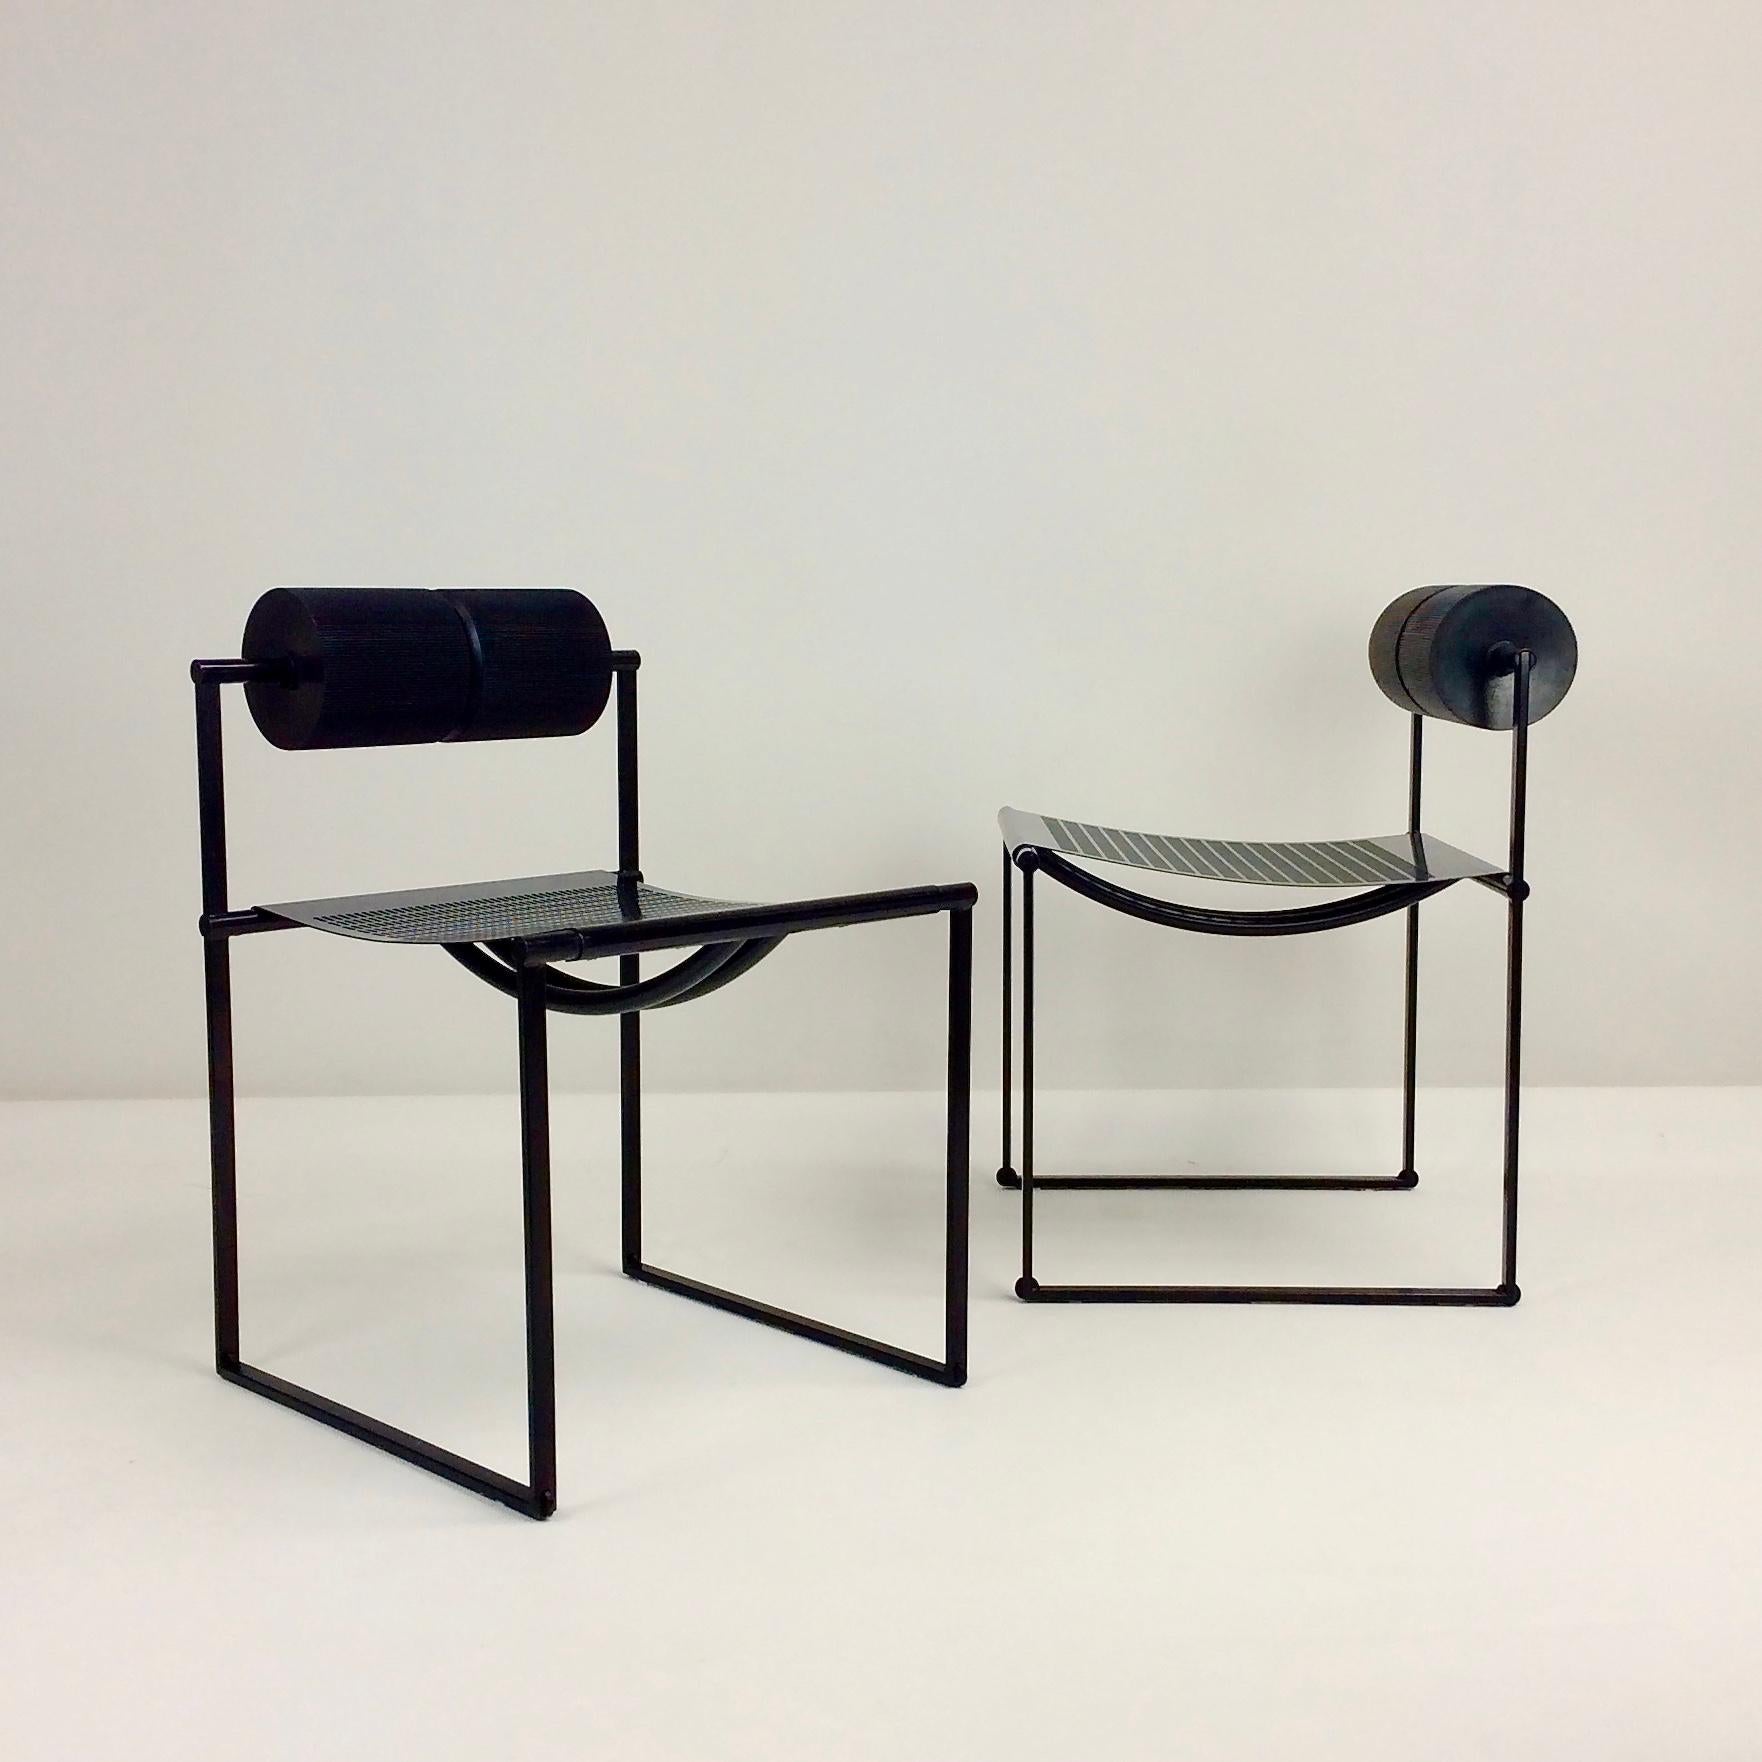 Nice pair of Mario Botta Prima chairs by Alias, 1982, Italy.
Black enameled steel, polyurethane foam cylinder.
Dimensions: 71 cm H, 51 cm D, 48 cm W, seat height: 43 cm.
Good original condition. Price is for the pair only.
All purchases are covered